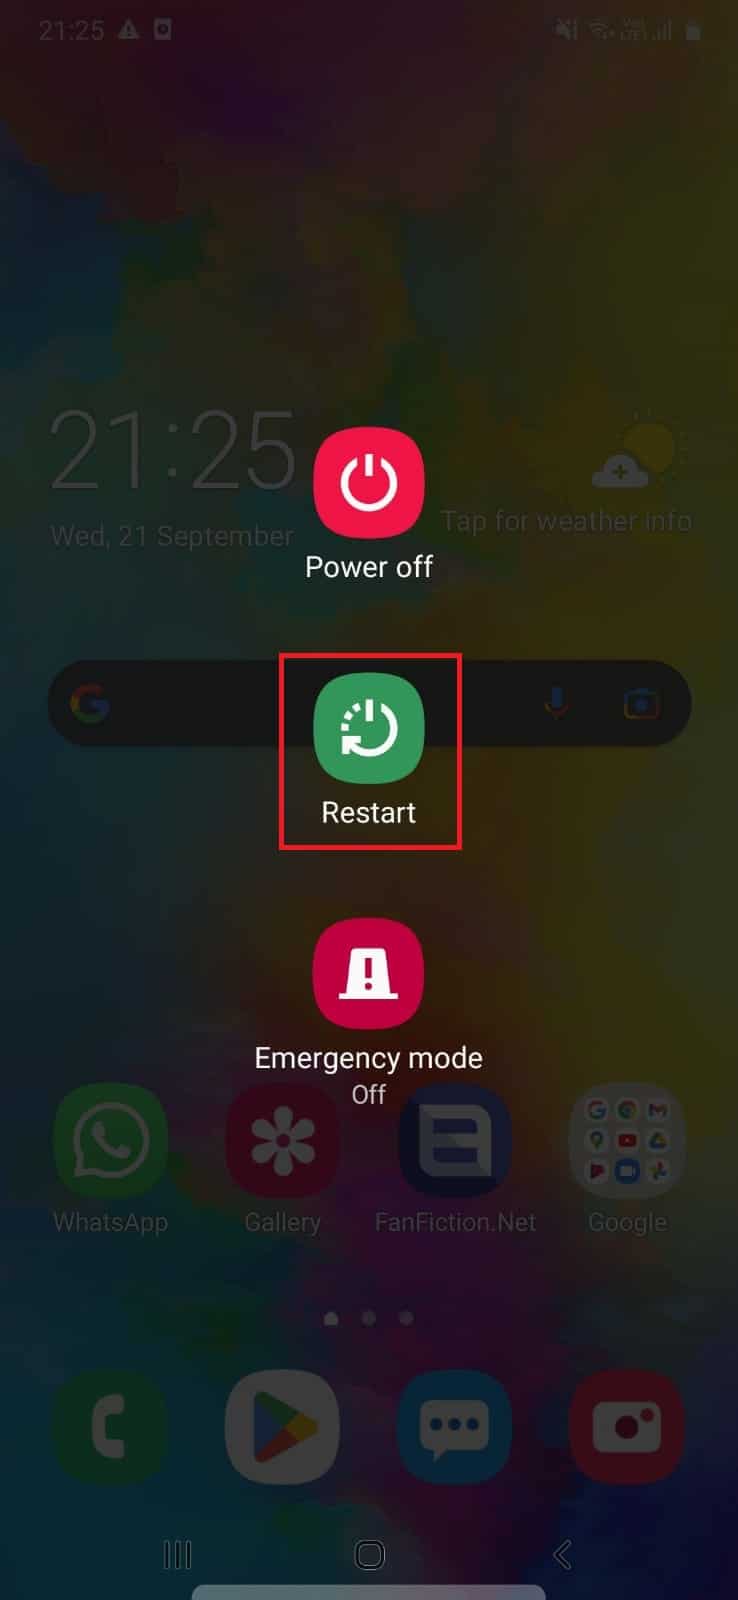 Restart - Samsung | remove black spots from your LCD screen